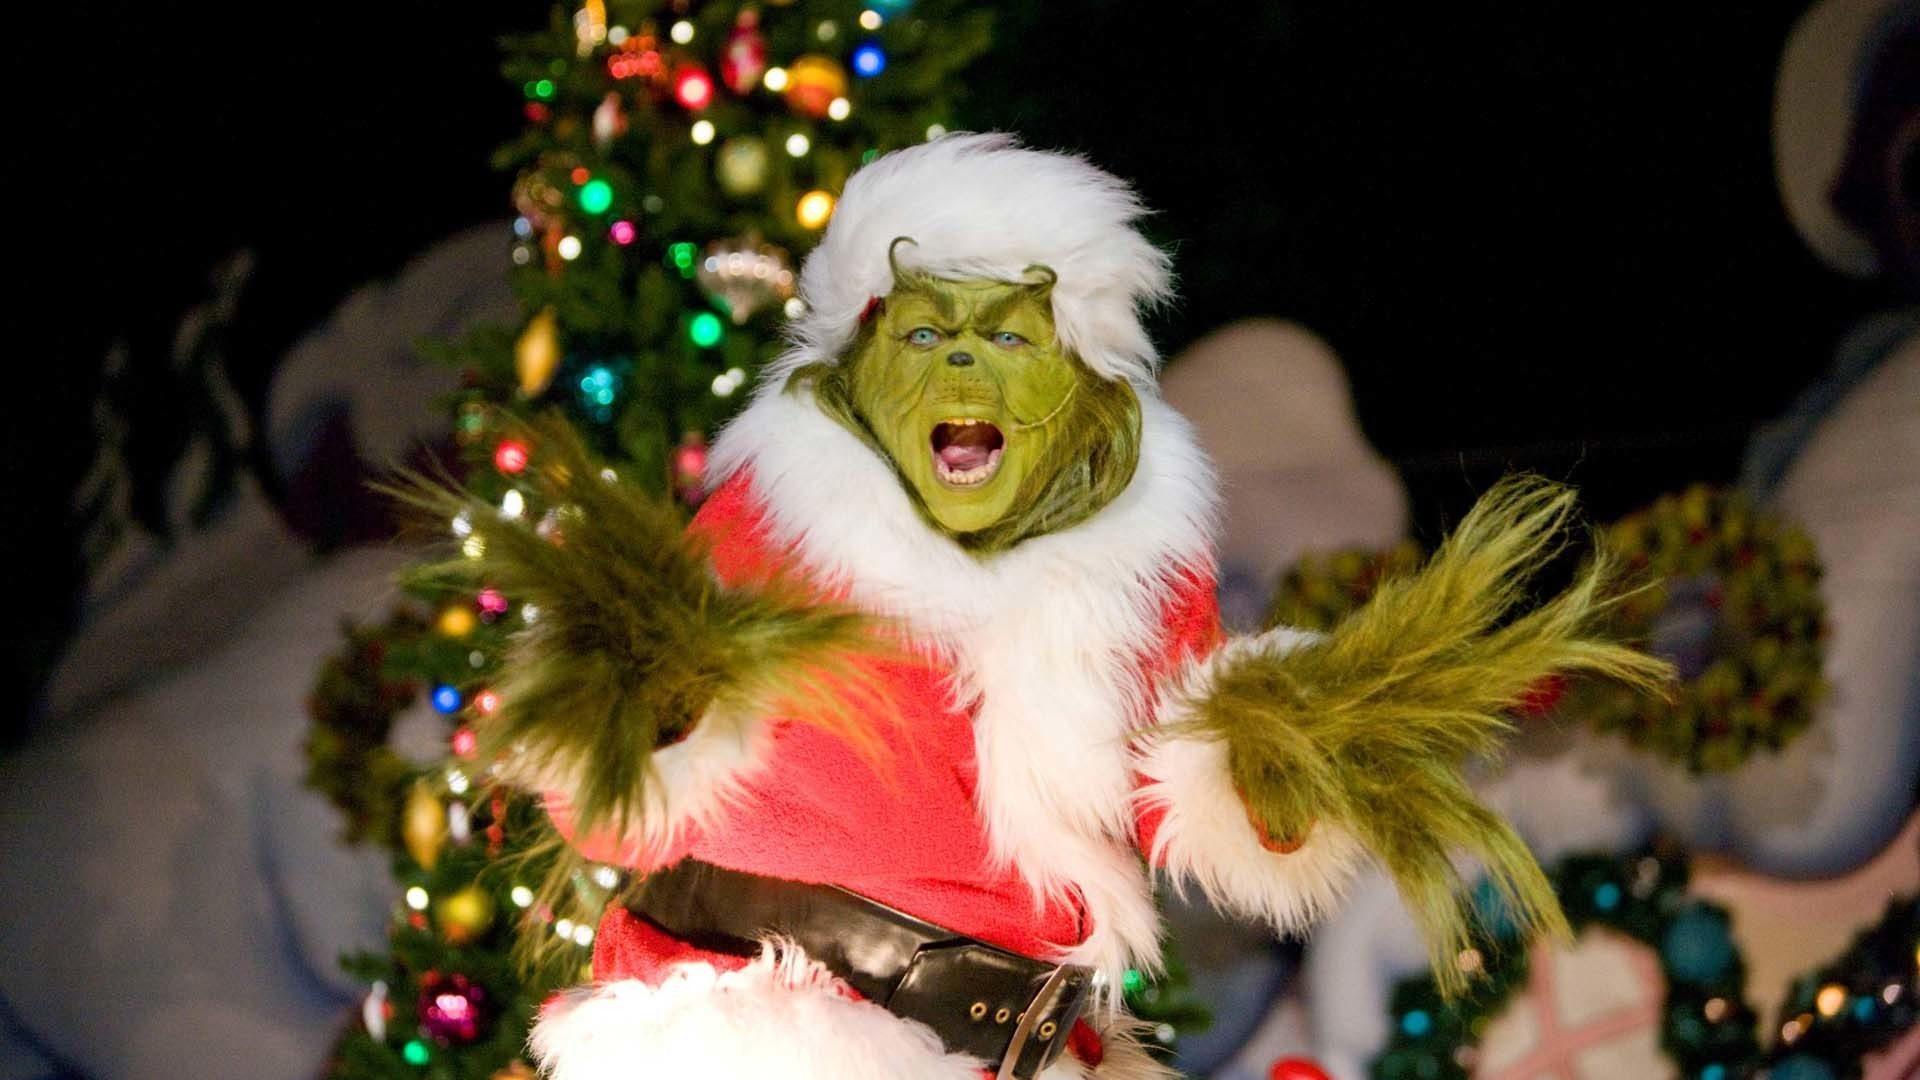 1920x1080 How The Grinch Stole Christmas Movie Wallpaper